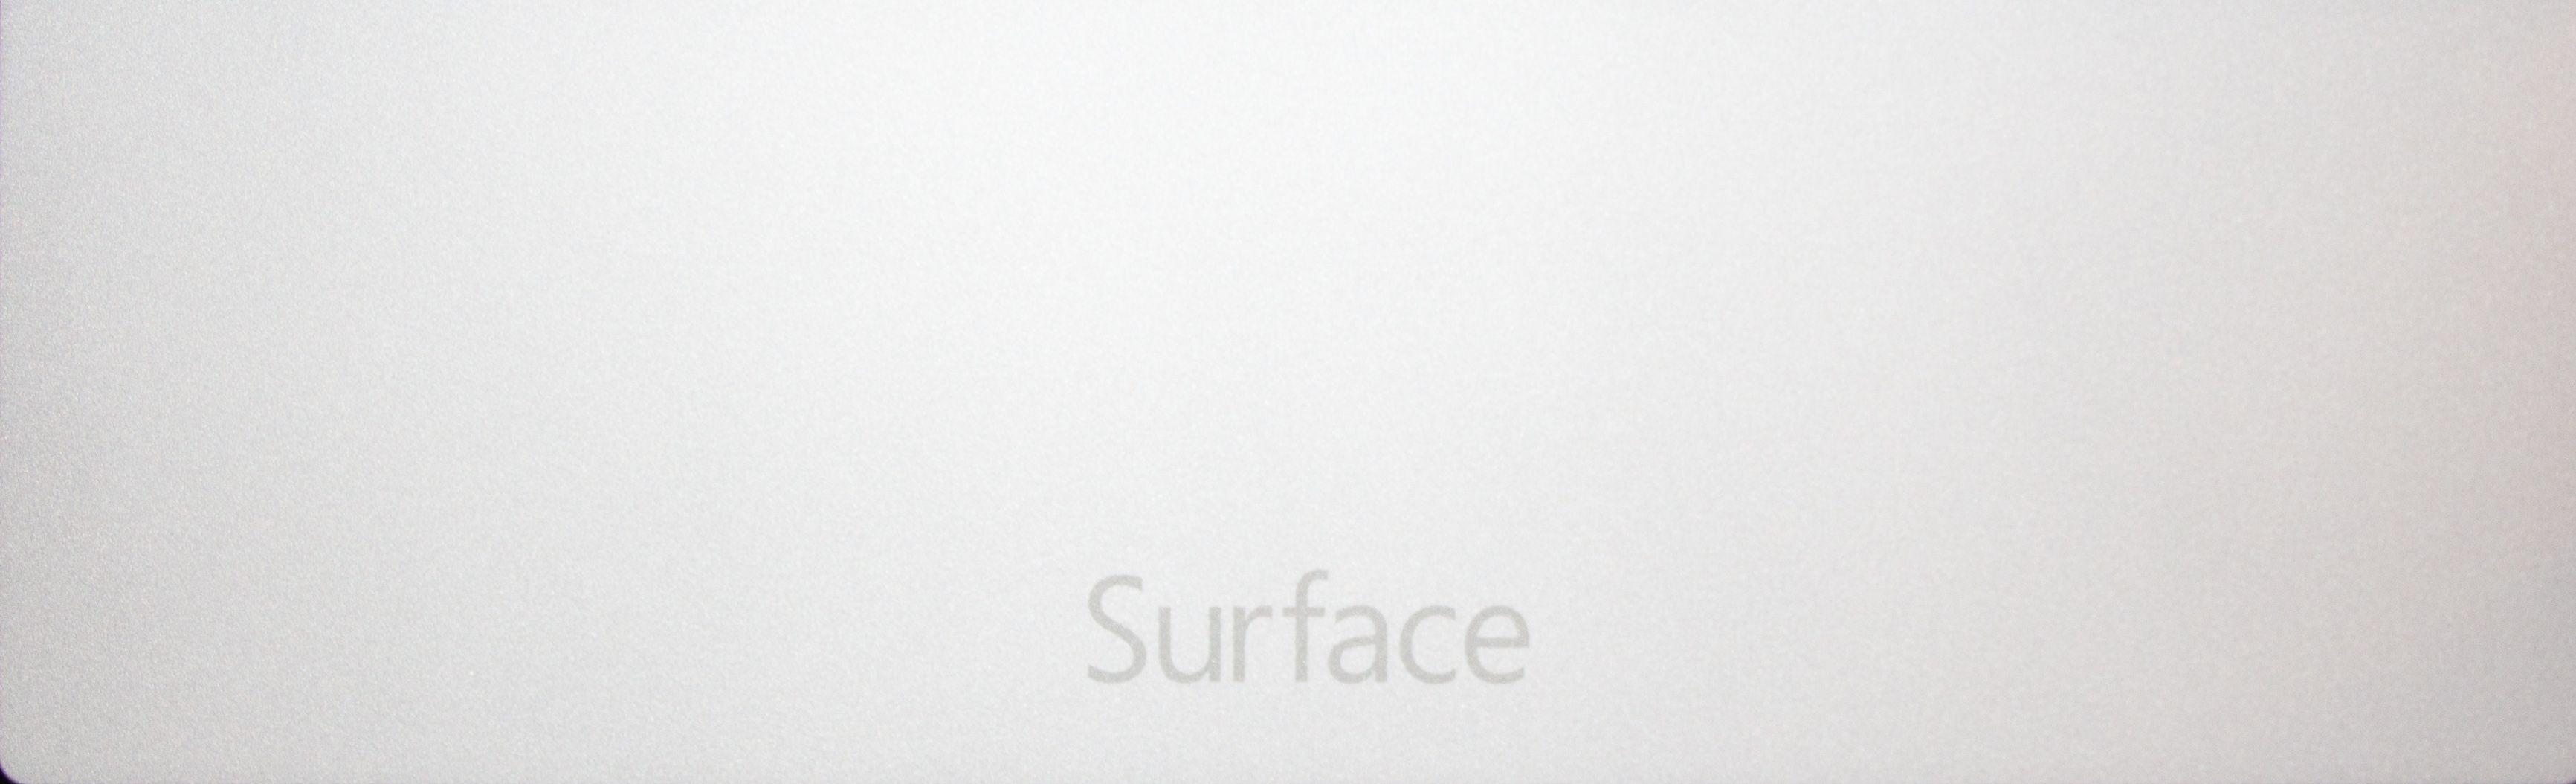 Windows Surface Logo - Surface 2: More than a tablet